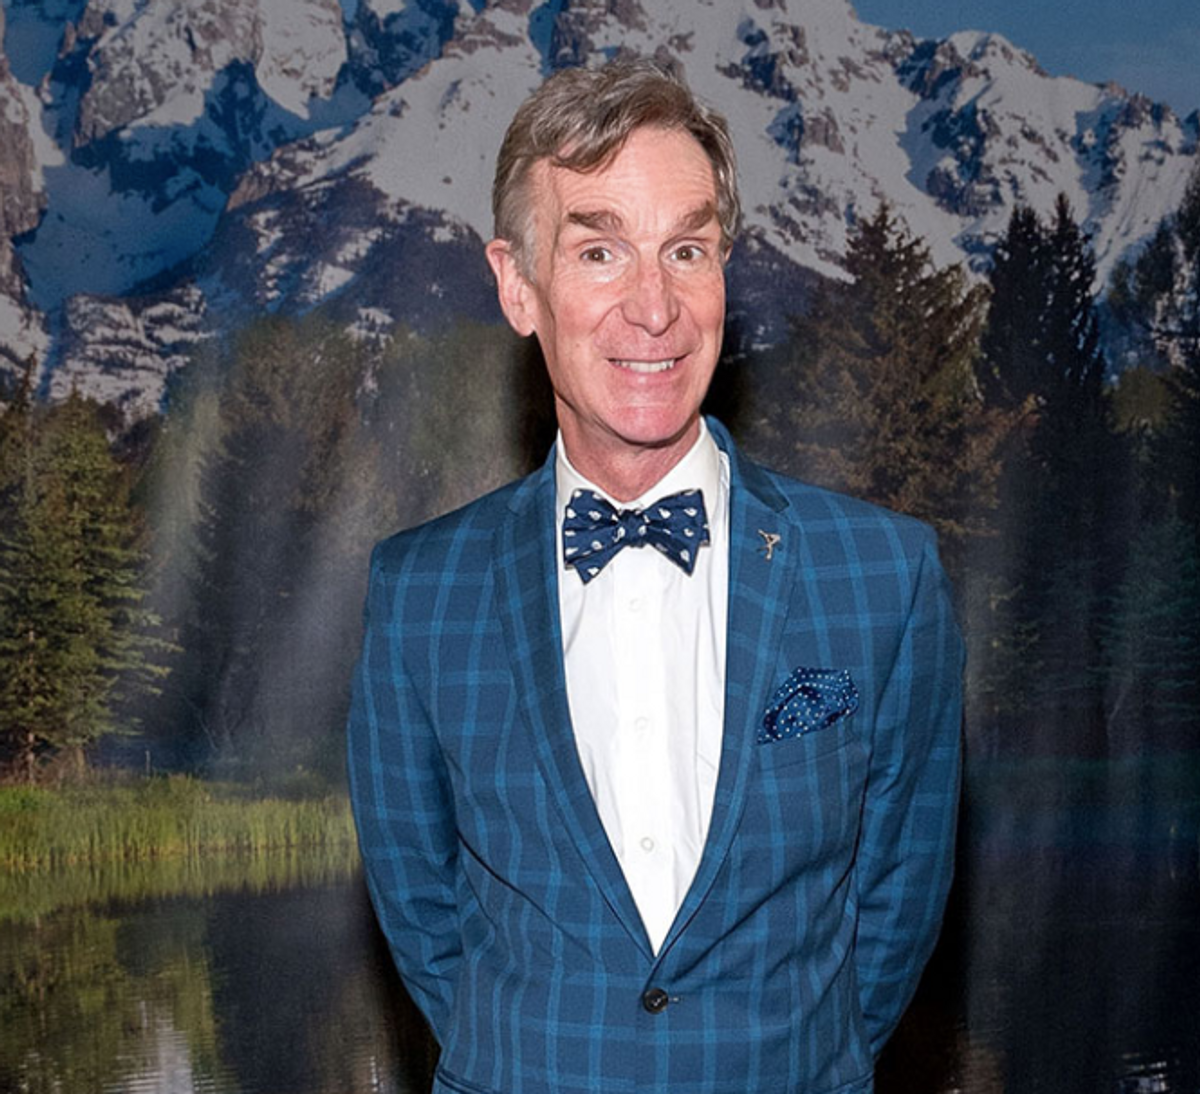 How Bill Nye Changed The Way Millennials See Science